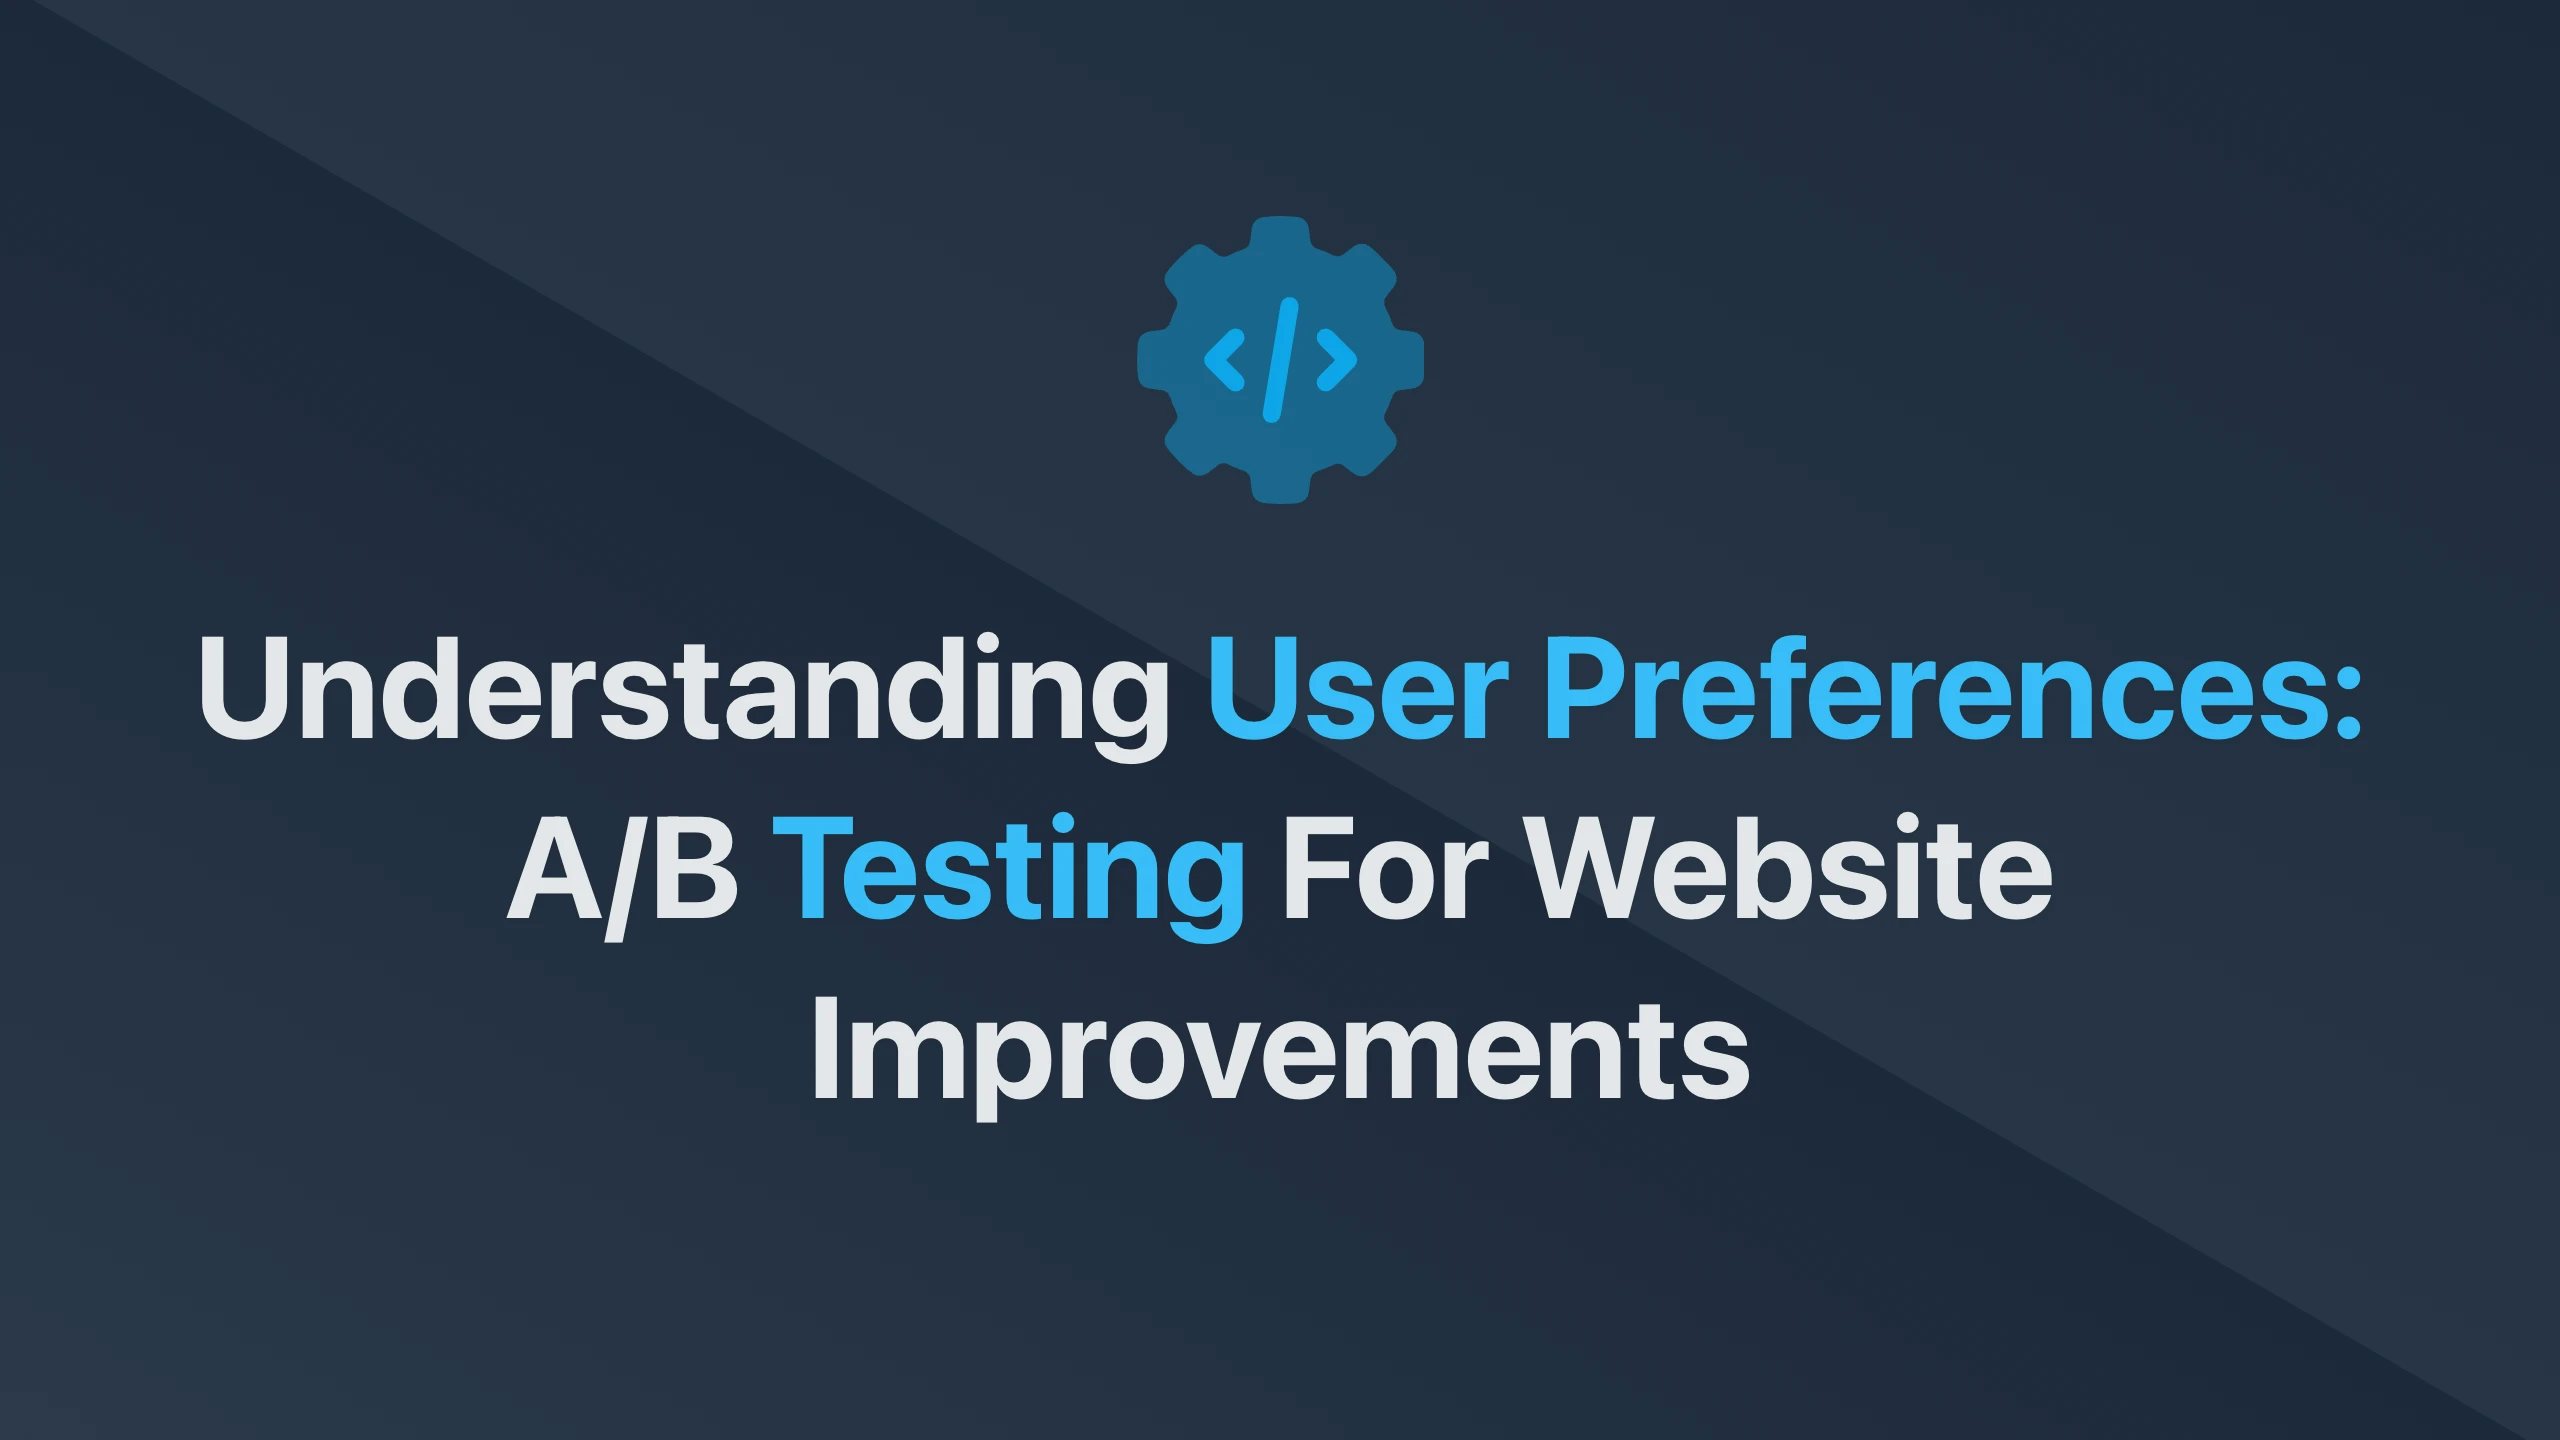 Cover Image for Understanding User Preferences: A/B Testing for Website Improvements